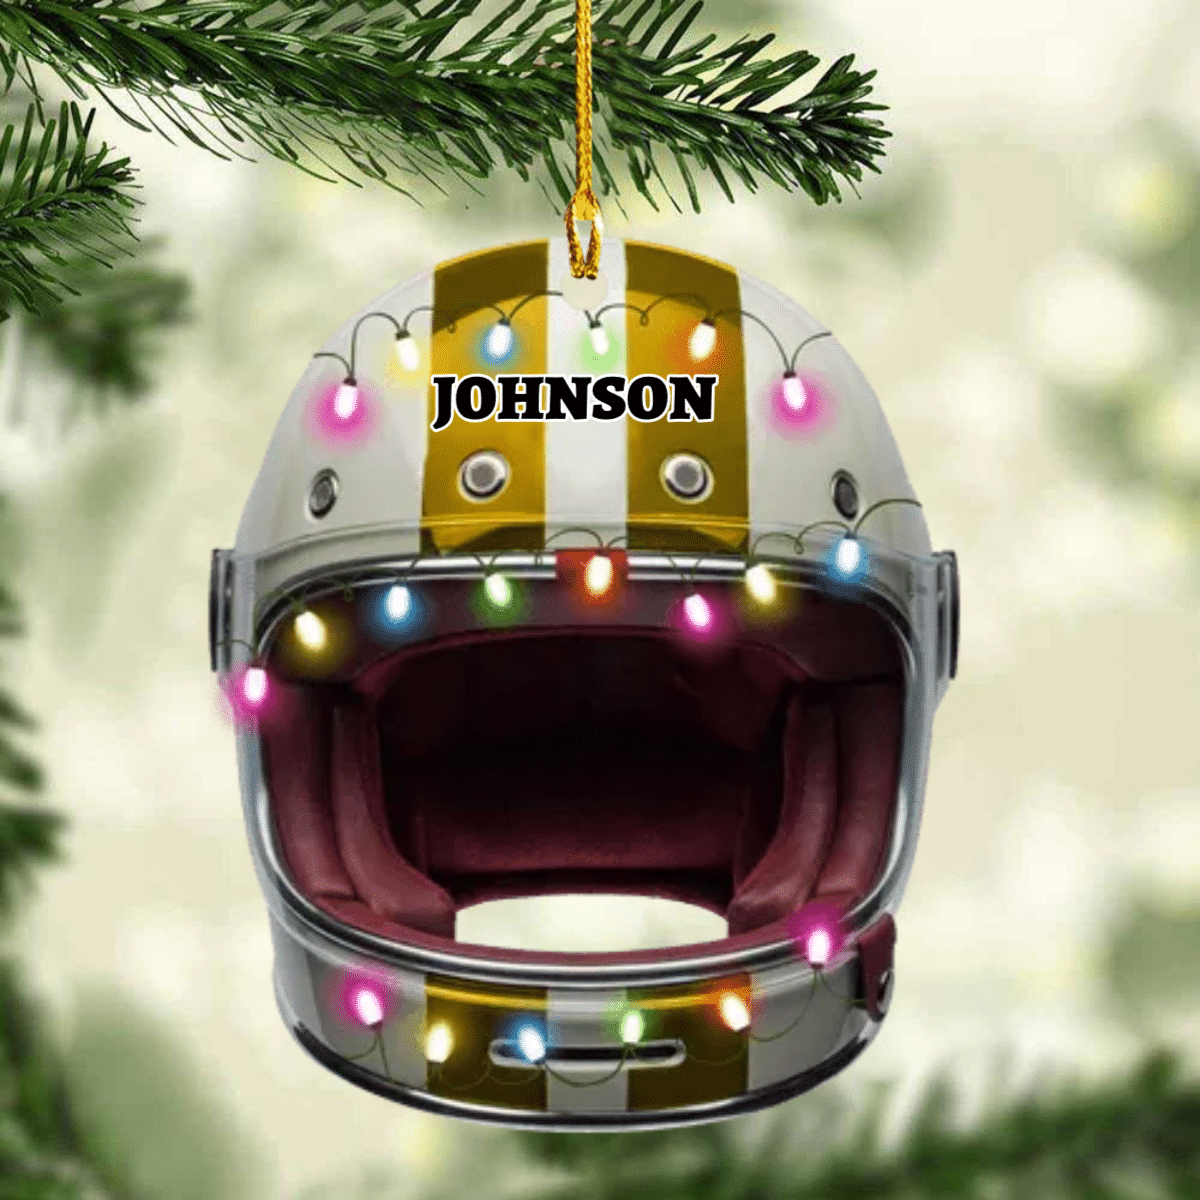 Personalized Racing Helmet With Christmas Light Ornament for Racing Lovers